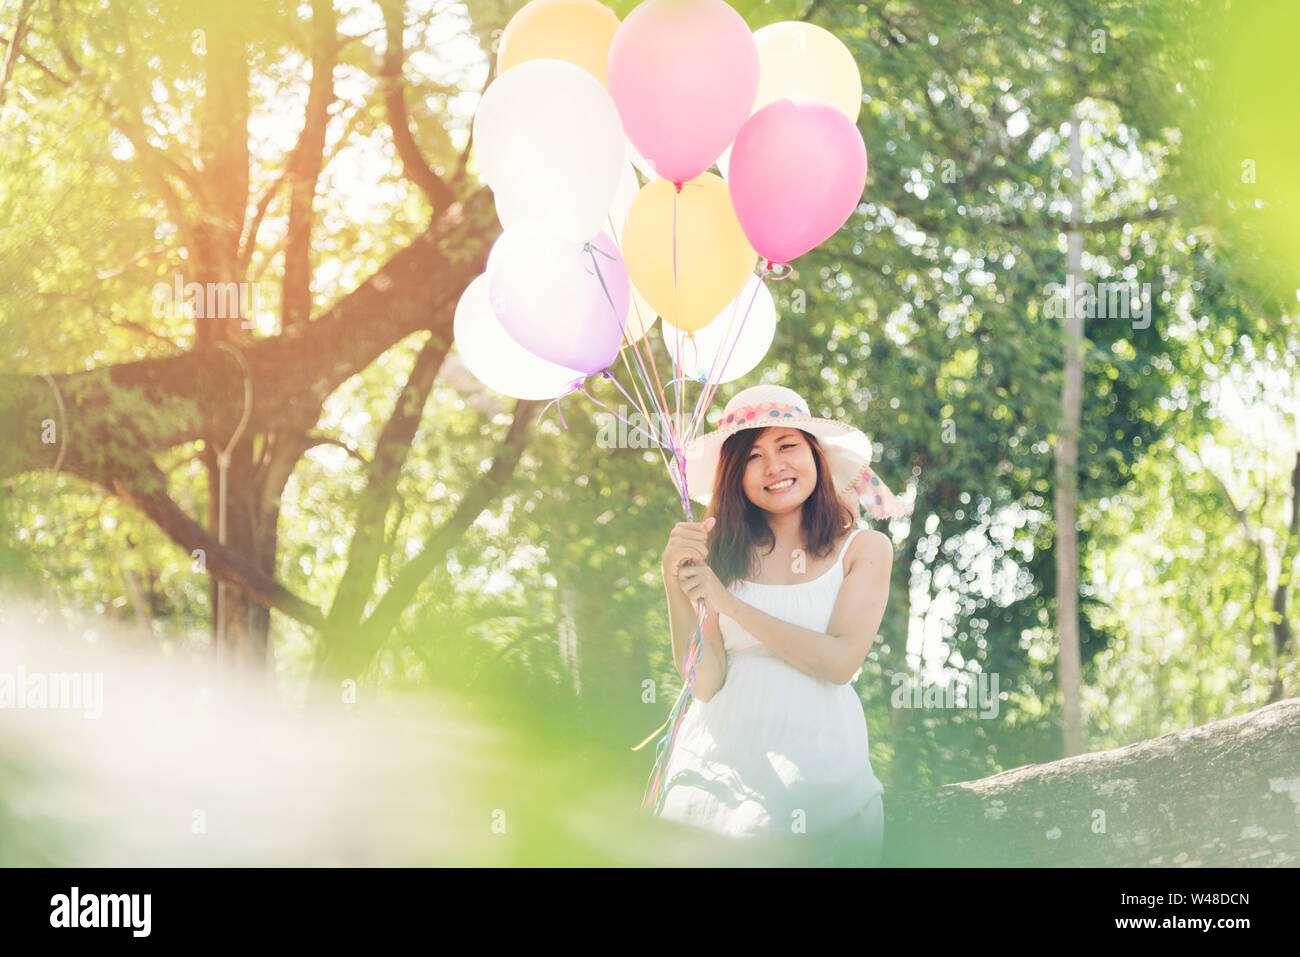 Beautiful young woman holding air balloons in garden Stock Photo